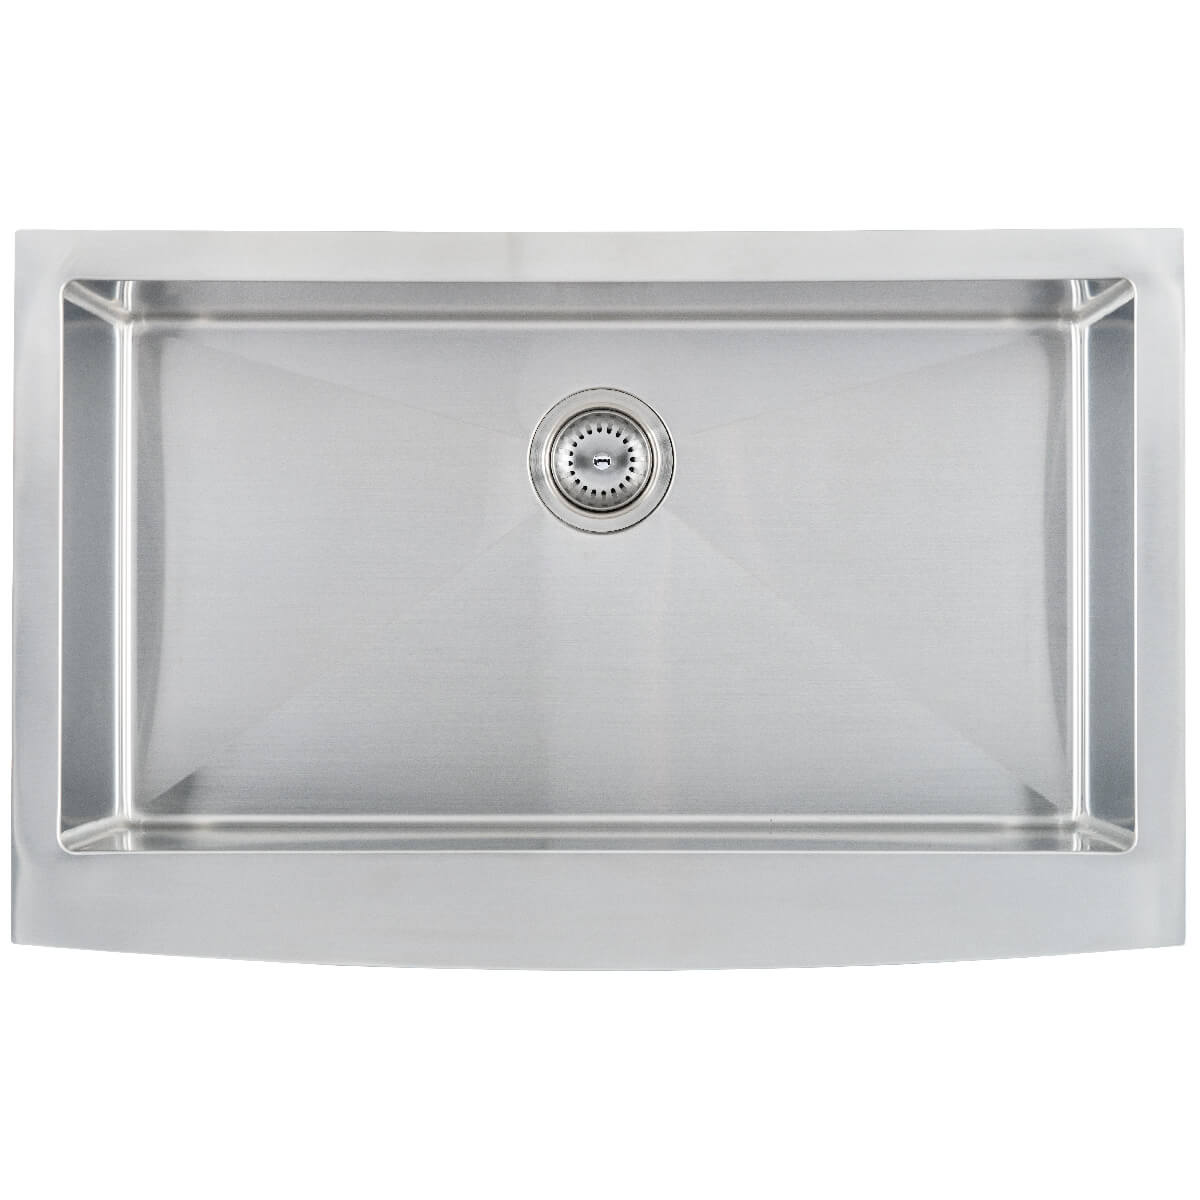 Jumbo Undermount Sink - SINGLE BOWL HANDCRAFTED FARMHOUSE WITH APRON 3321